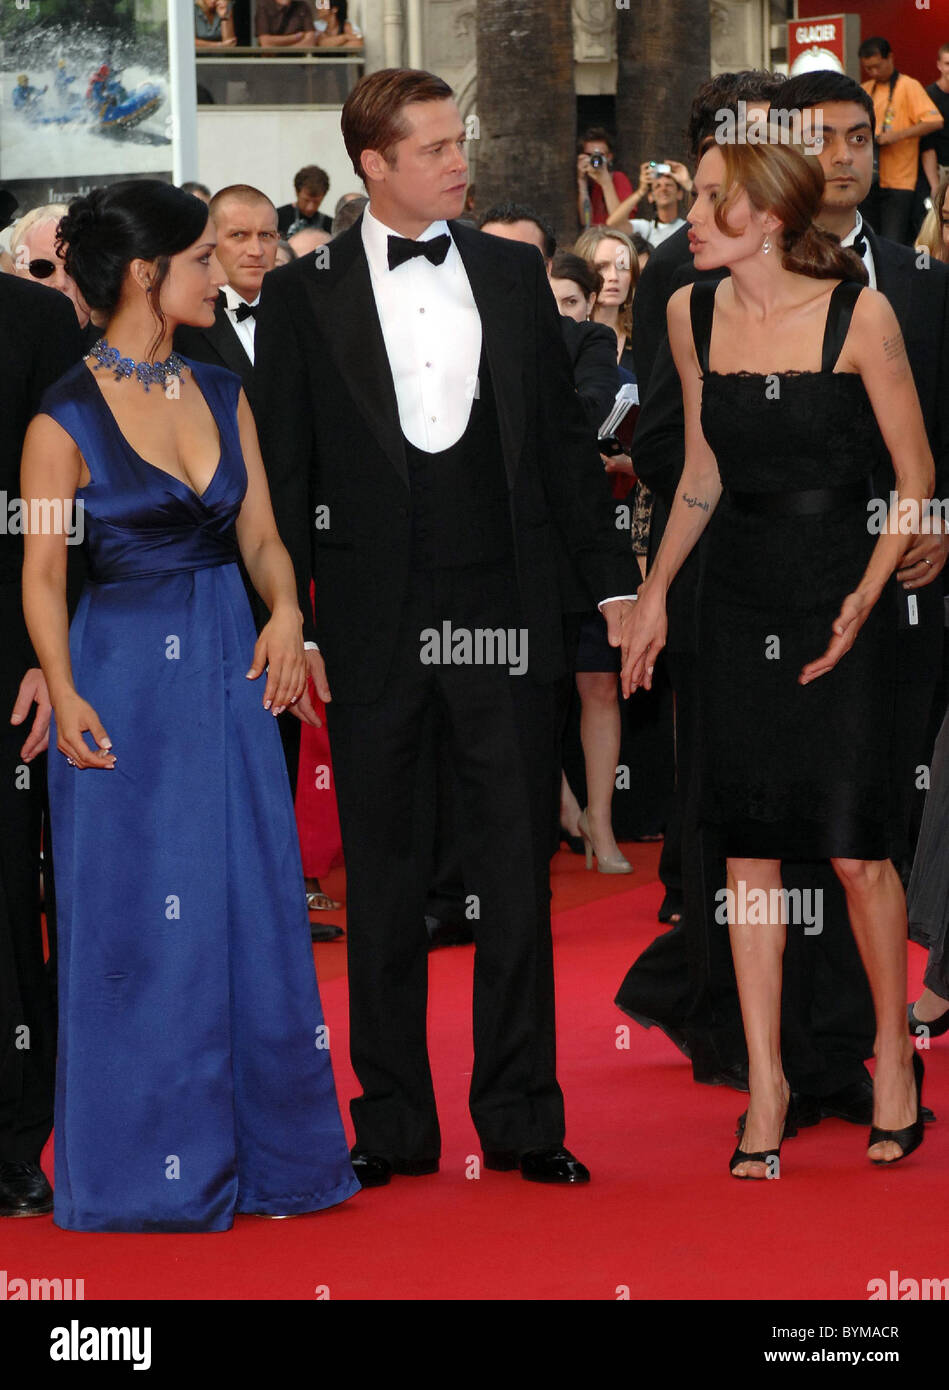 Angelina Jolie and Brad Pitt 2007 Cannes Film Festival Day 6 - 'A Mighty  Heart' Premiere Cannes, France  Stock Photo - Alamy